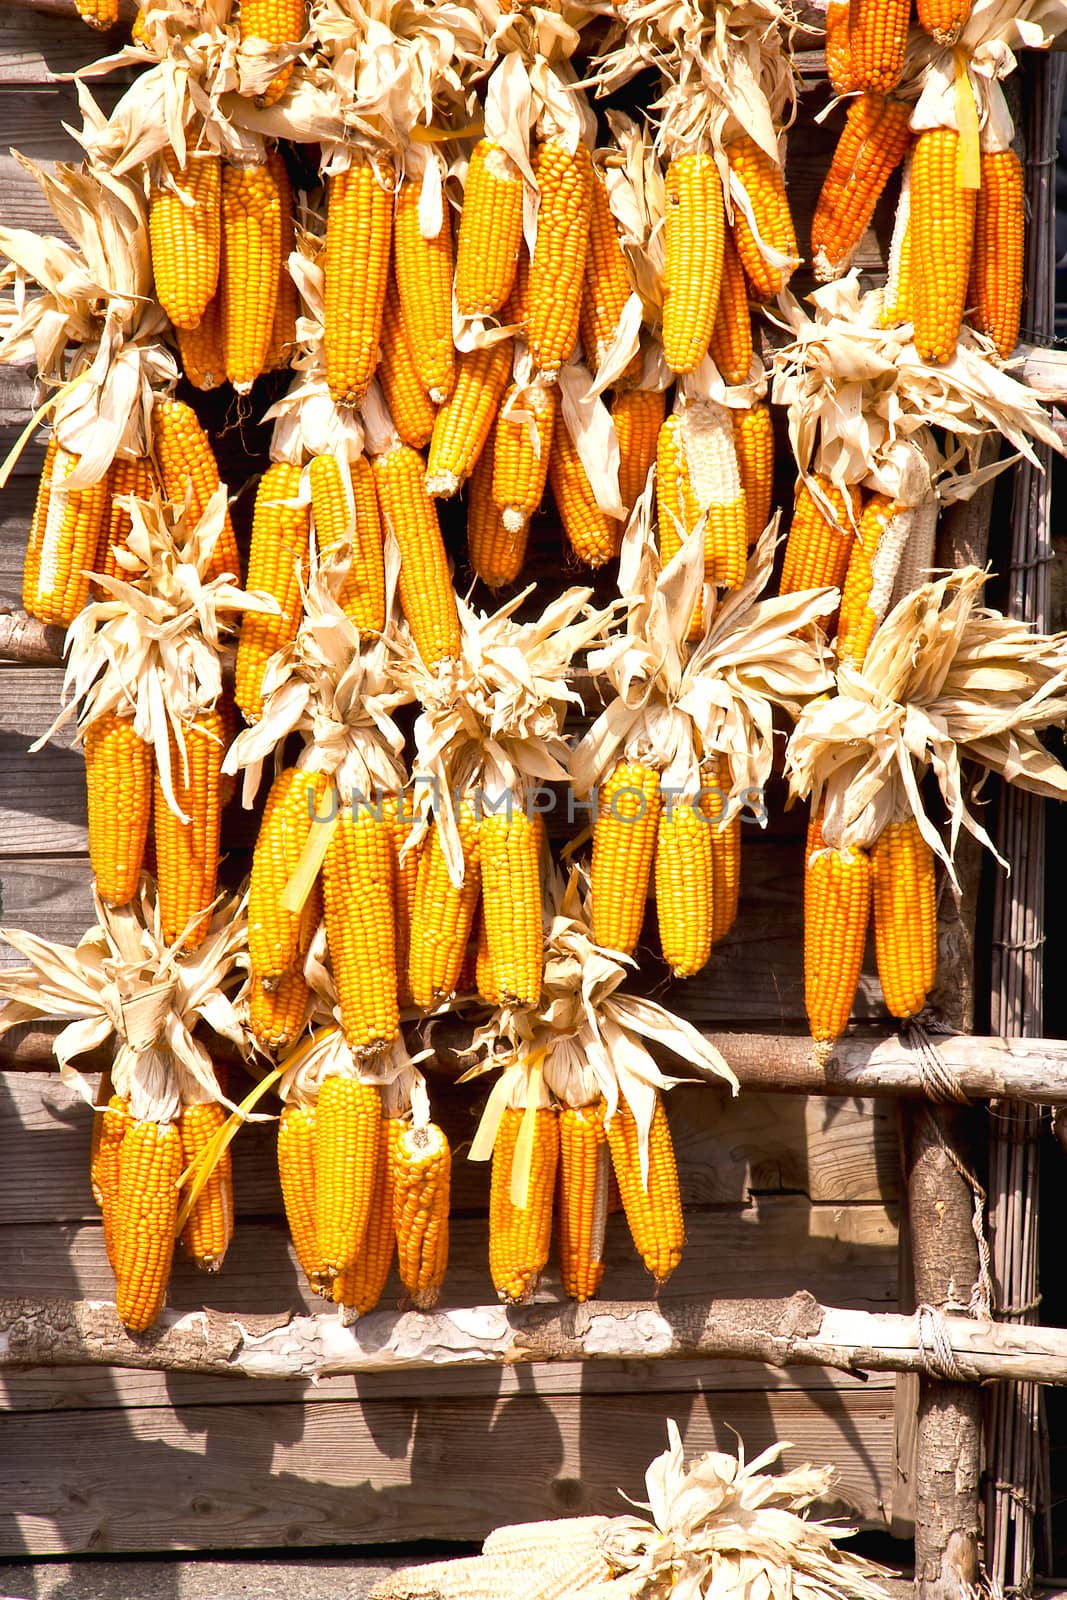 Many corn had been hung on the wood